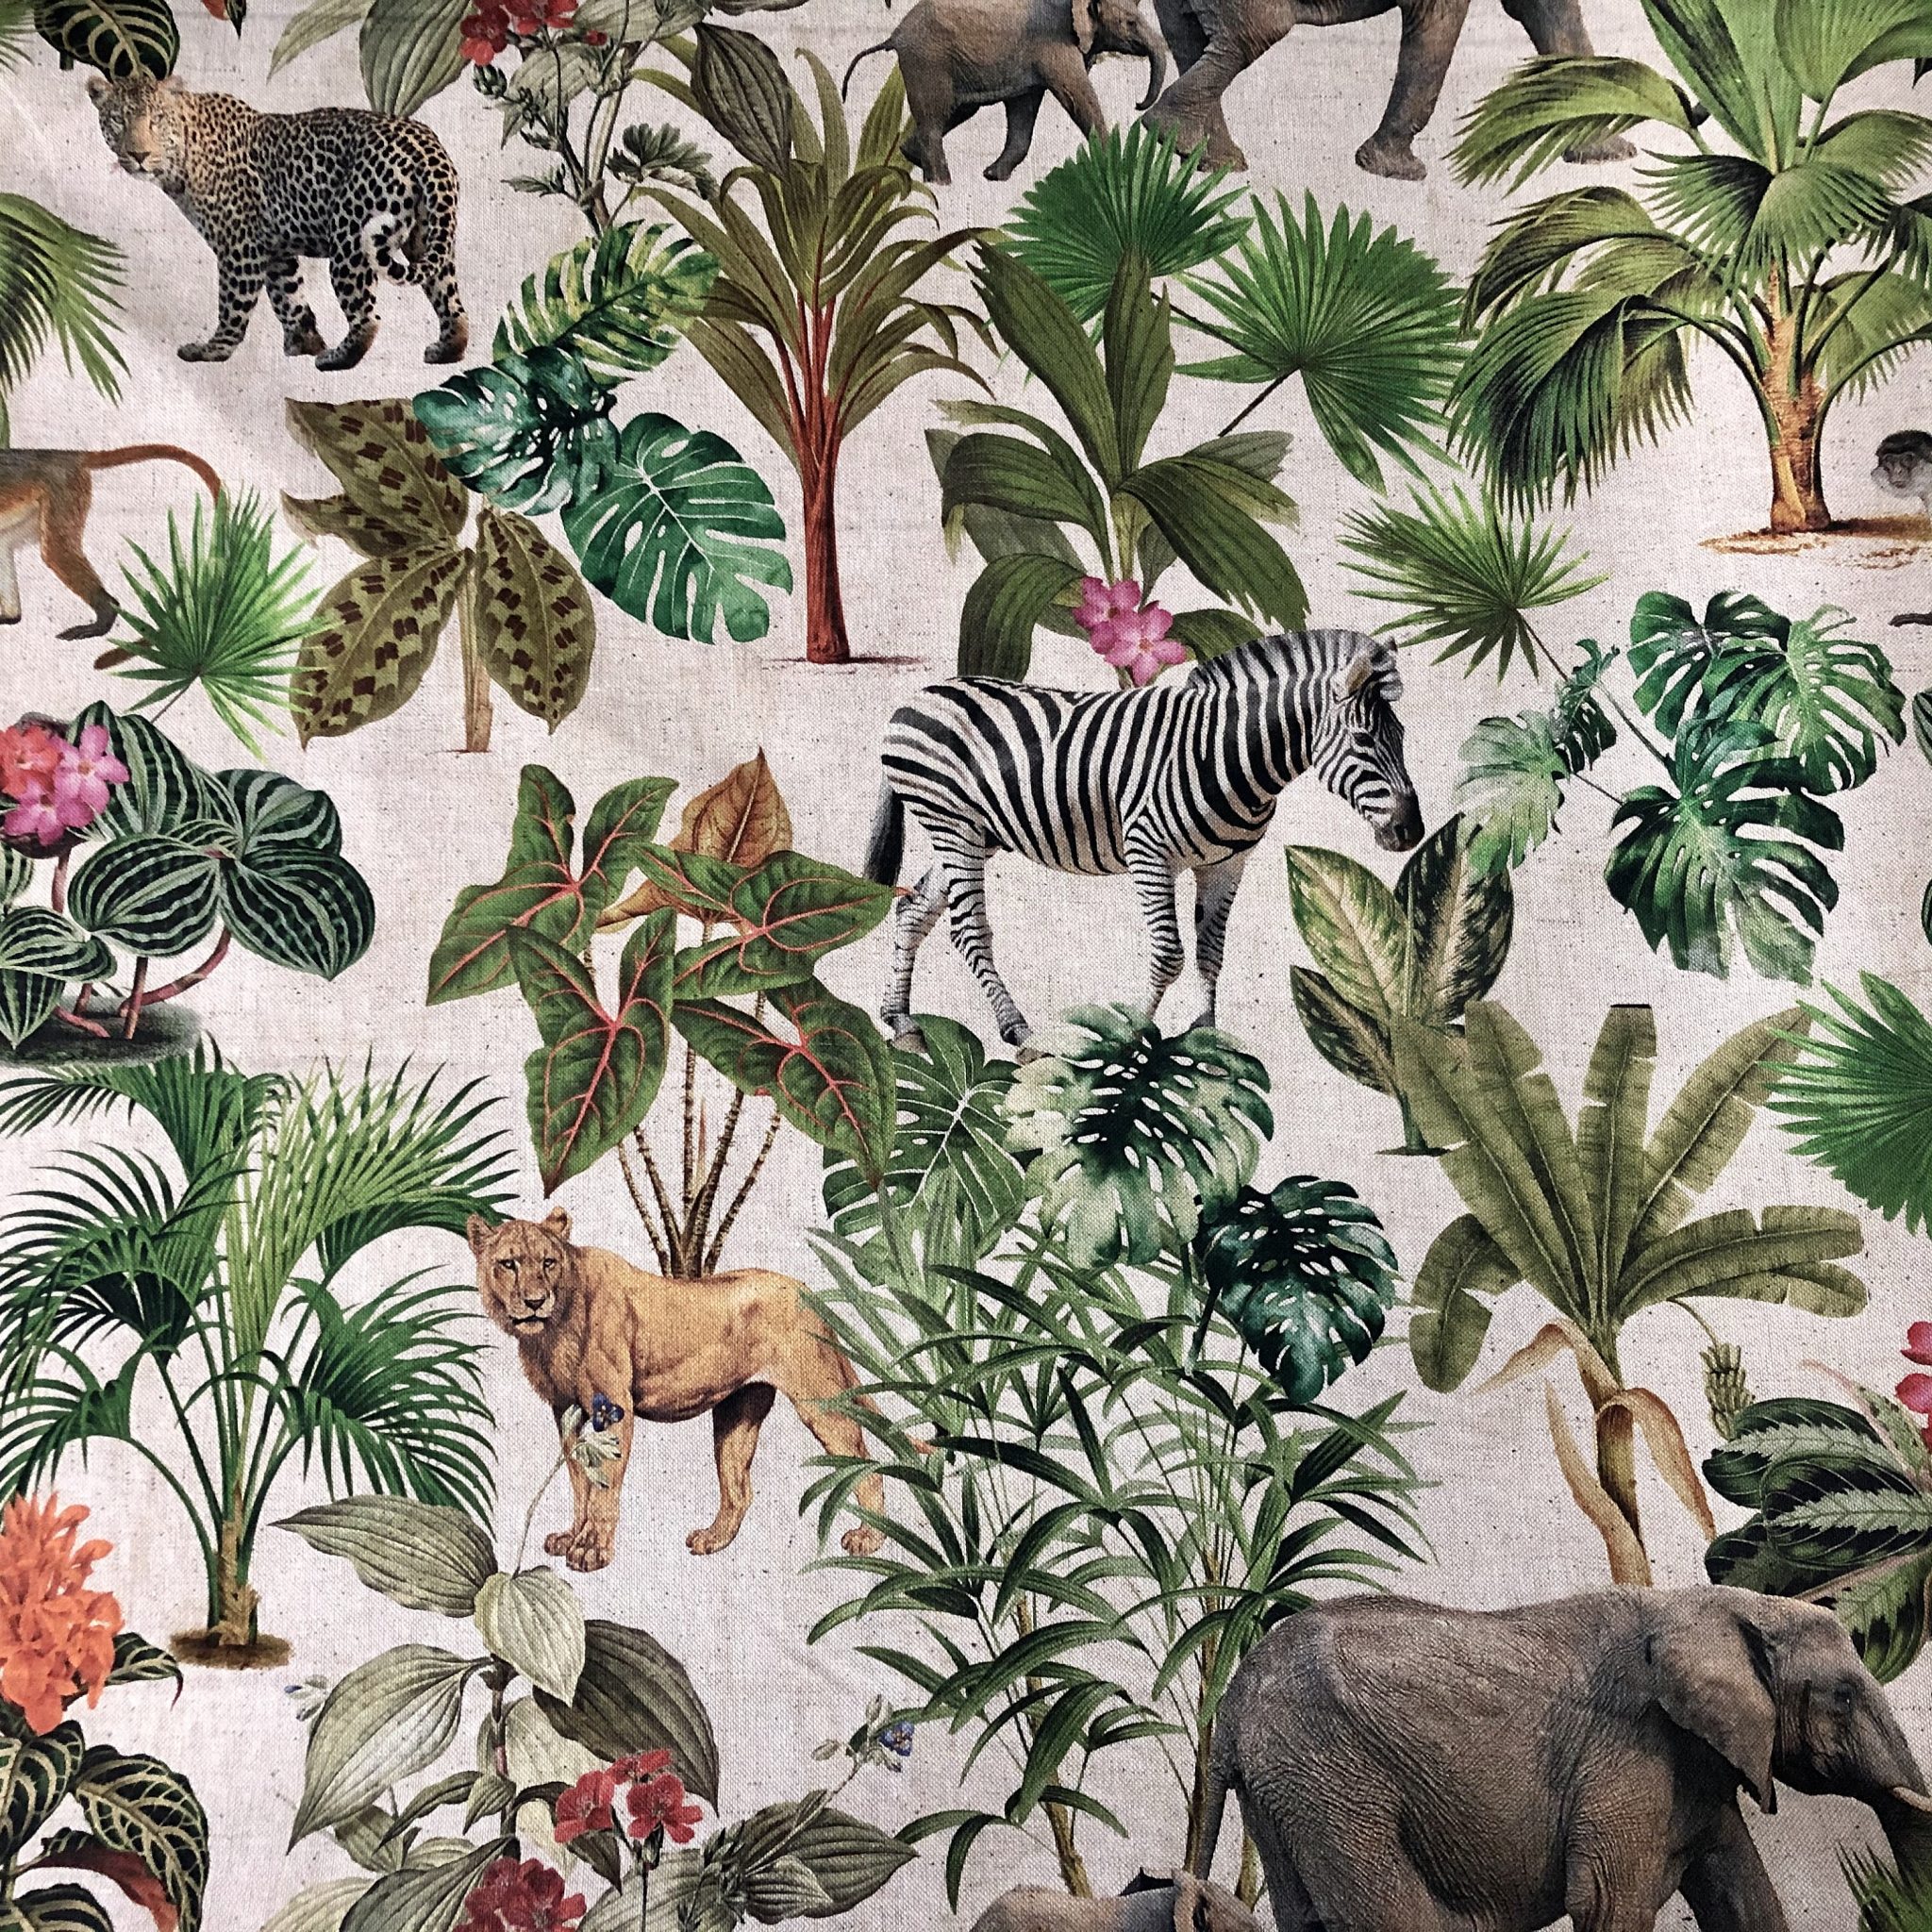 Safari Zoo African Animal Digital Print Fabric Tropical Jungle Palm Flower Leaf Material Linen Look 108 275cm Extra Wide Canvas 5f7f24a4 2048x2048 